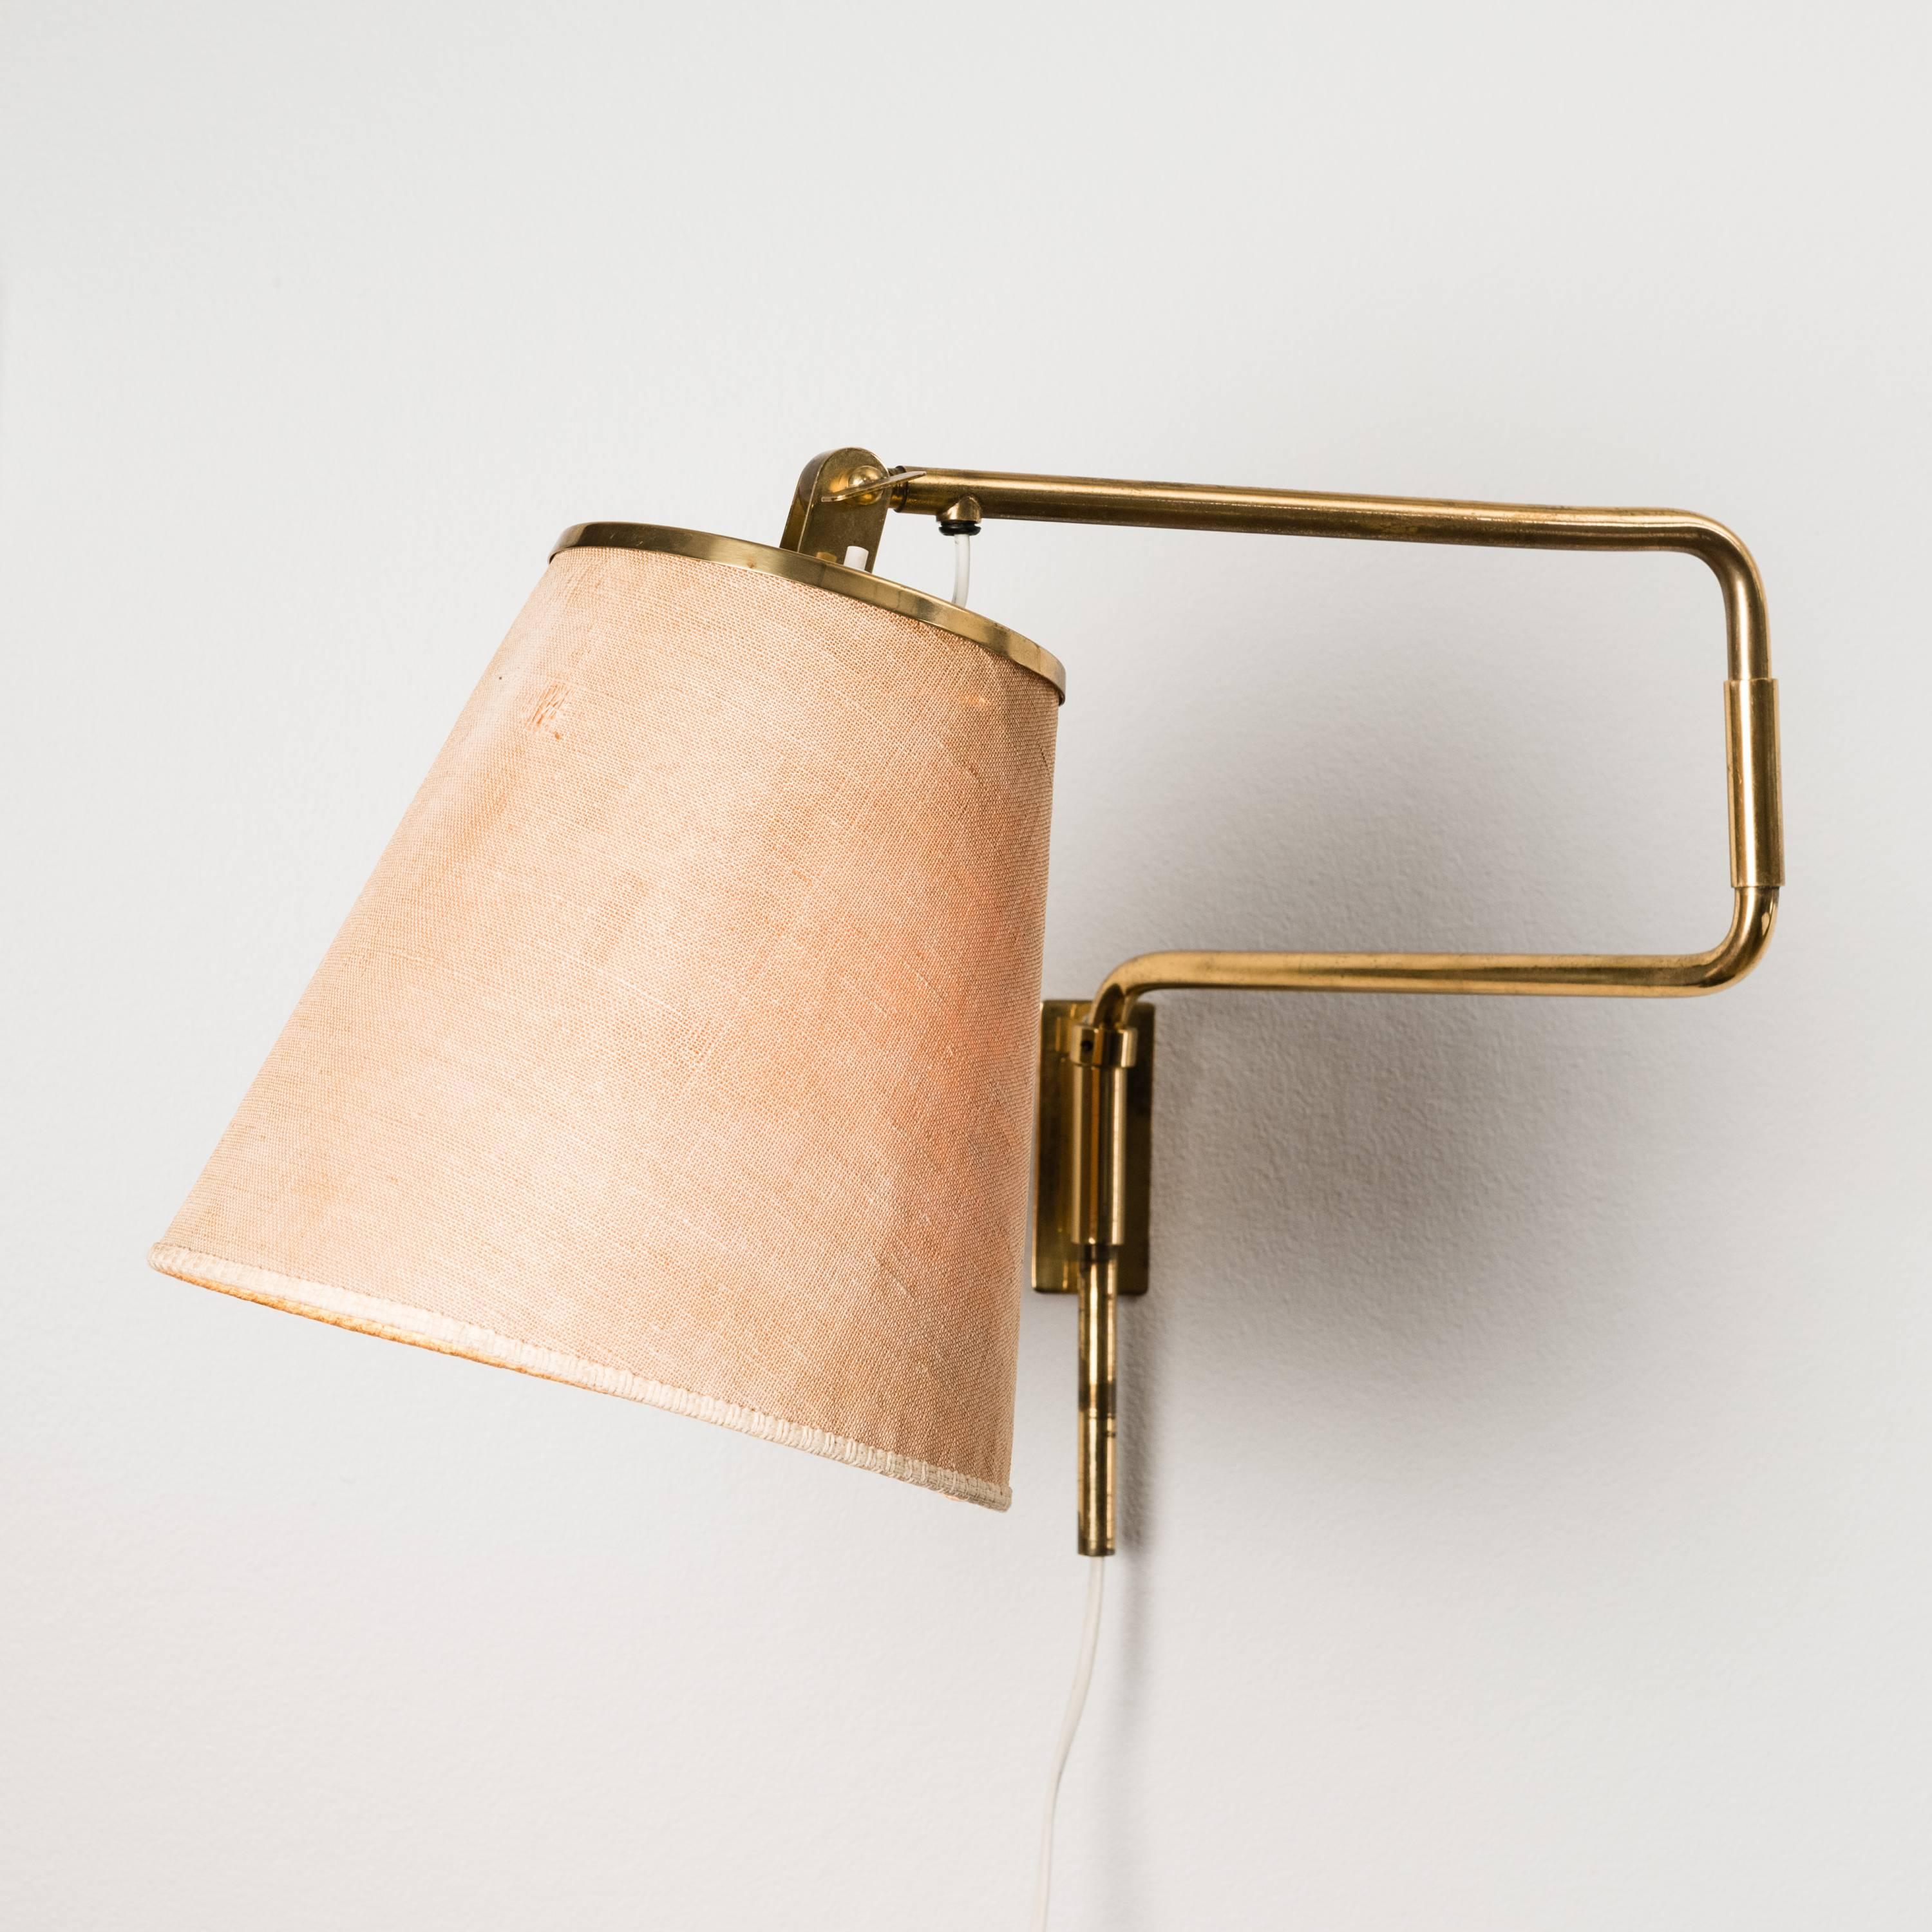 Finnish Paavo Tynell, Wall Light, Model 9414, Taito For Sale